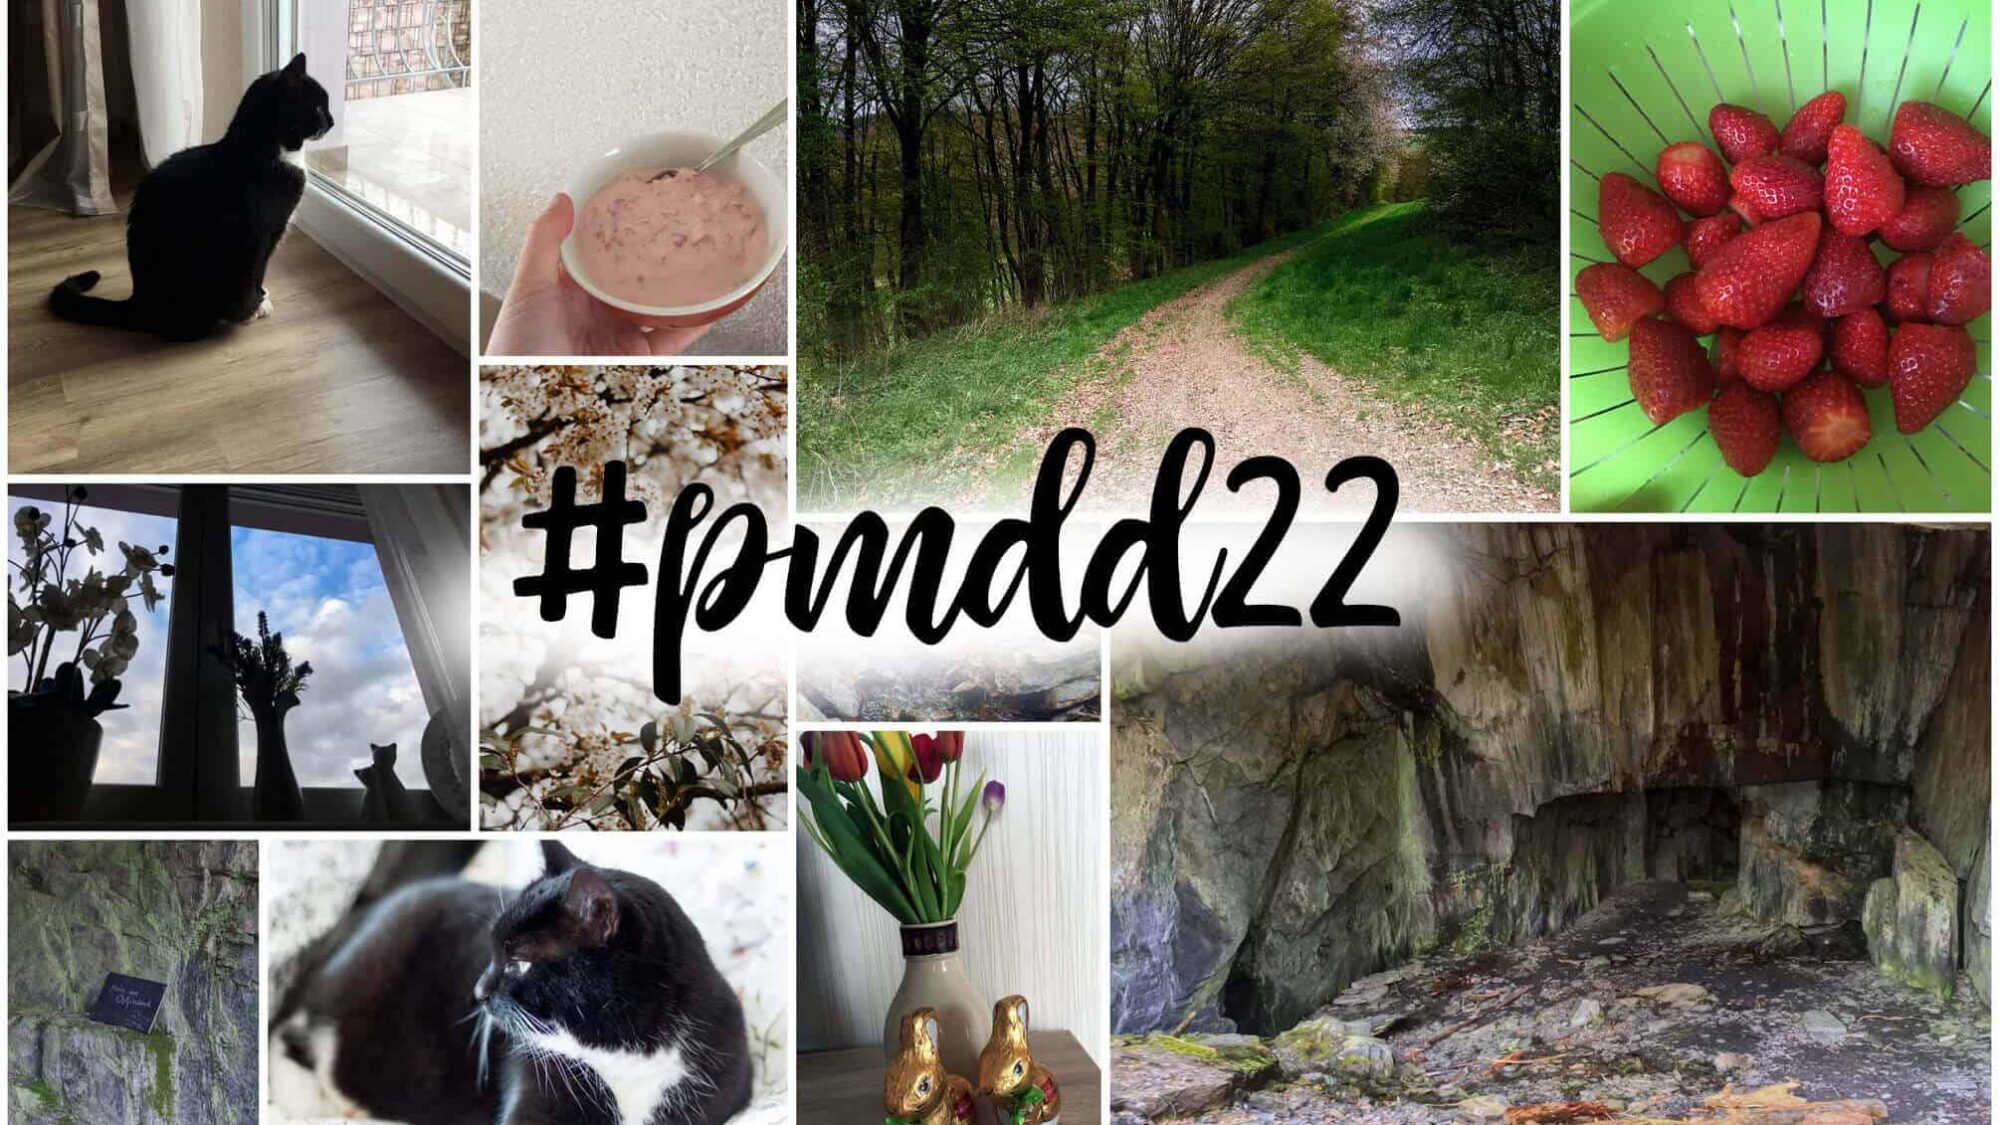 pmdd22 - Picture my Day Day Nummer 22